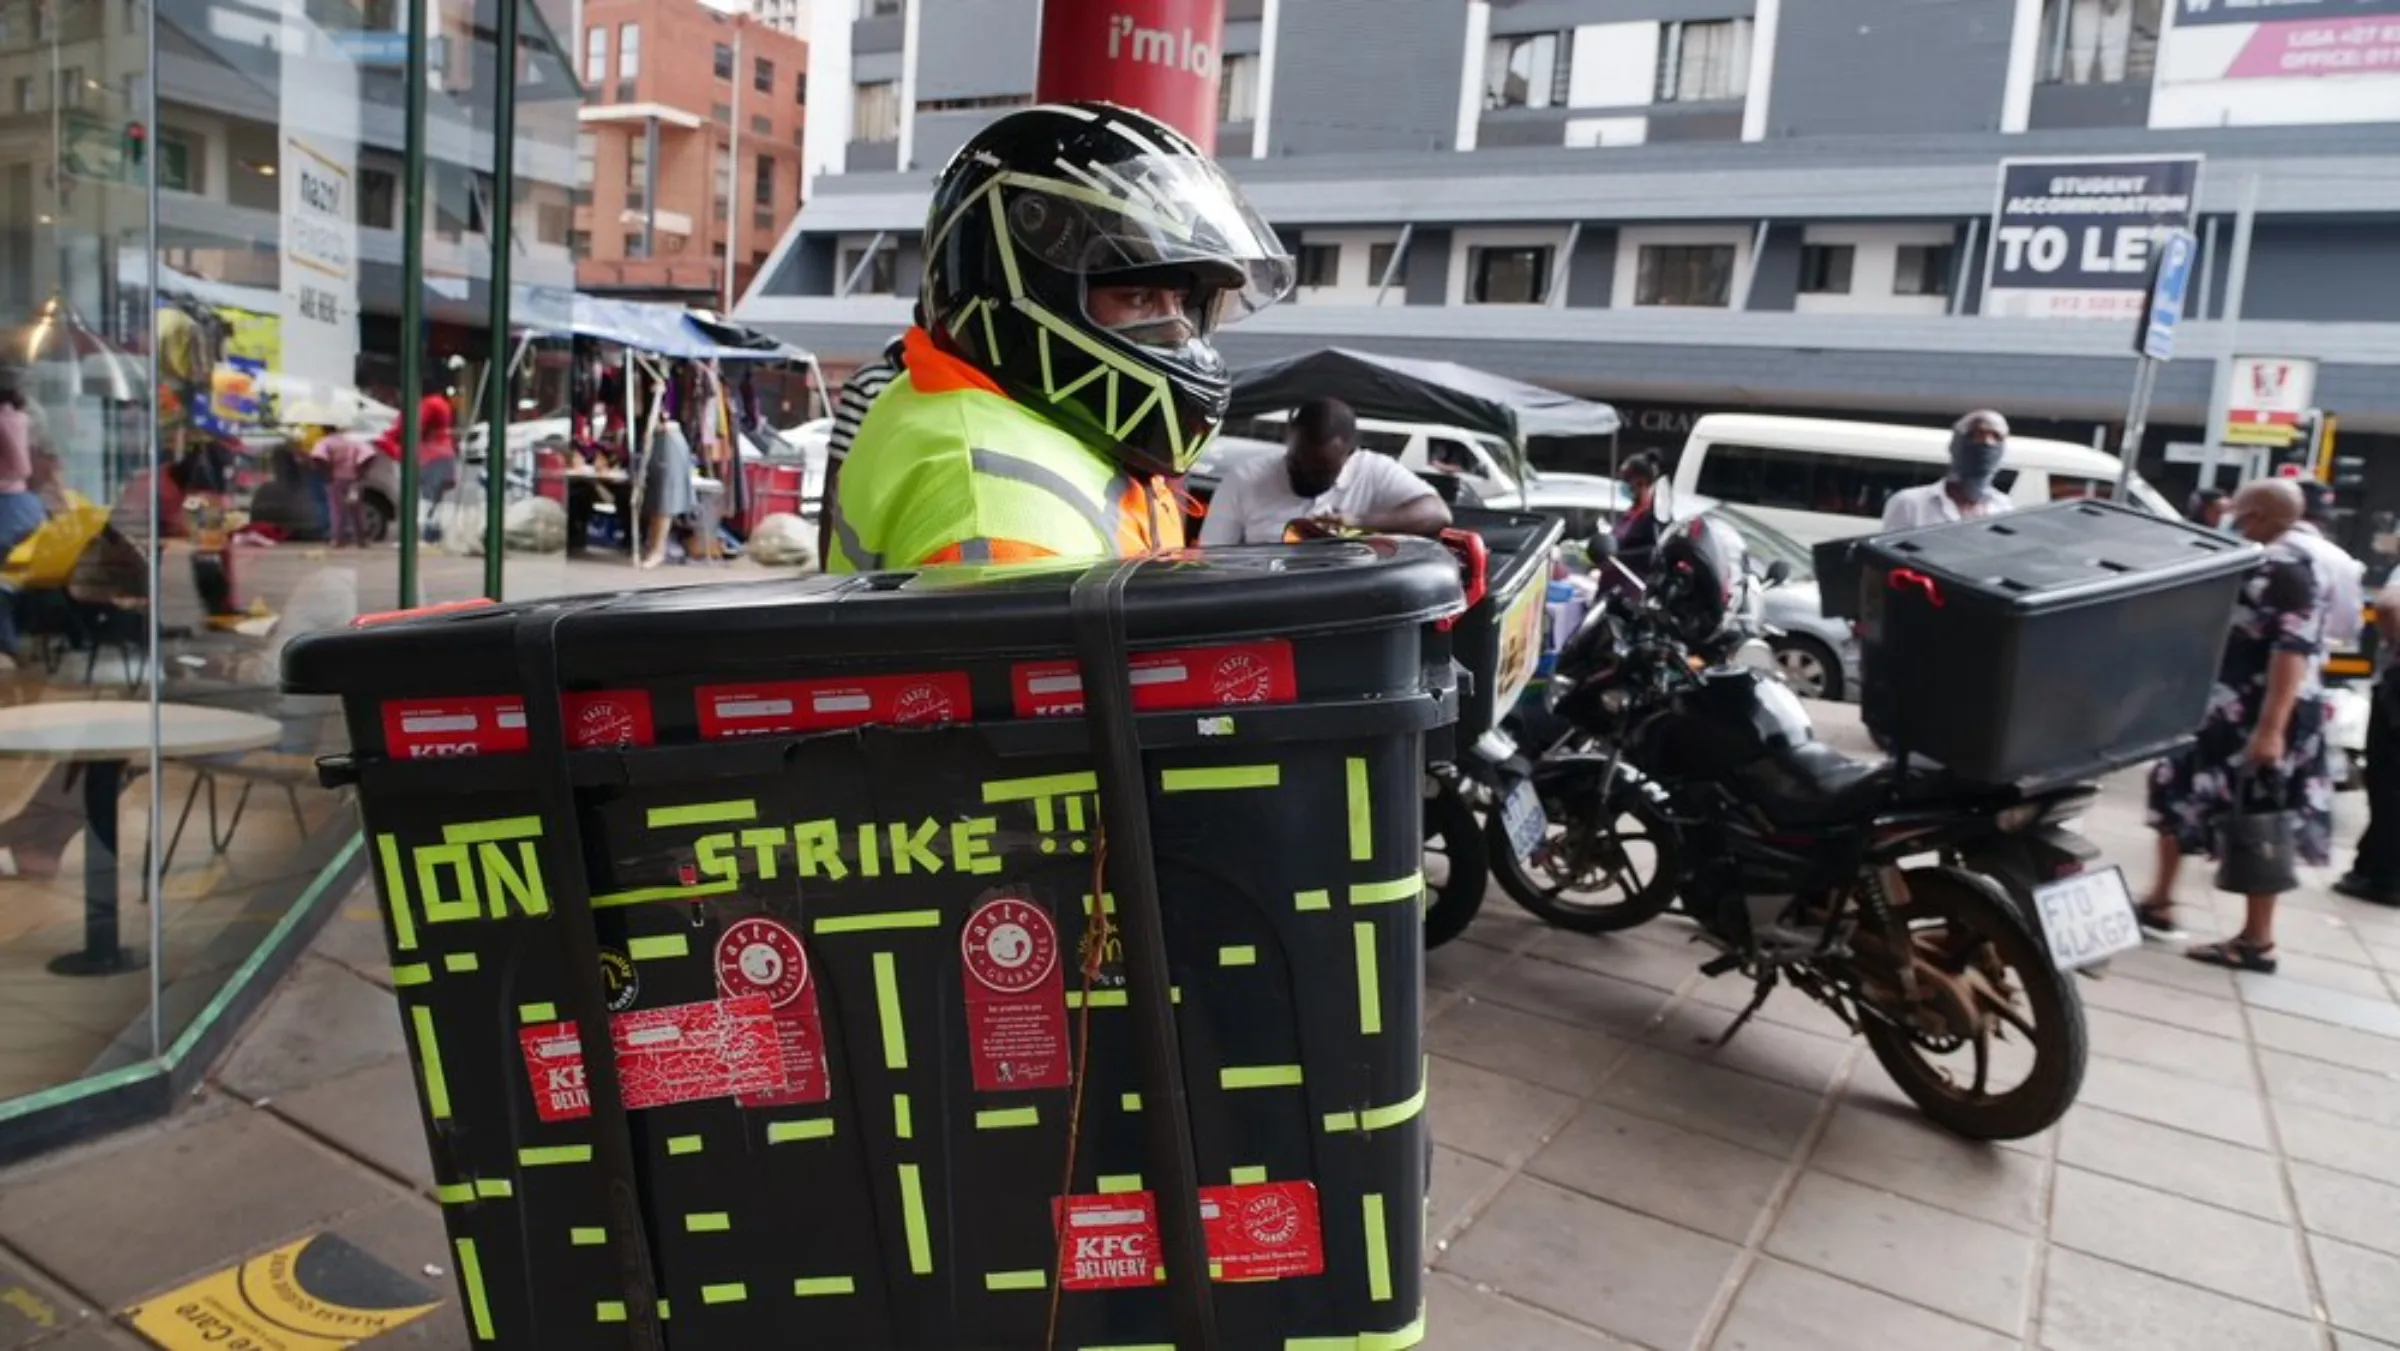 John peers over his food delivery box covered in neon stickers that indicate he was part of the January Uber Eats strike protesting delivery fee cuts across South Africa. Drivers say the fee cuts together with lost income during lockdown mean they have to spend longer hours on the road to make ends meet. February 9, 2020. Thomson Reuters Foundation/Kim Harrisberg